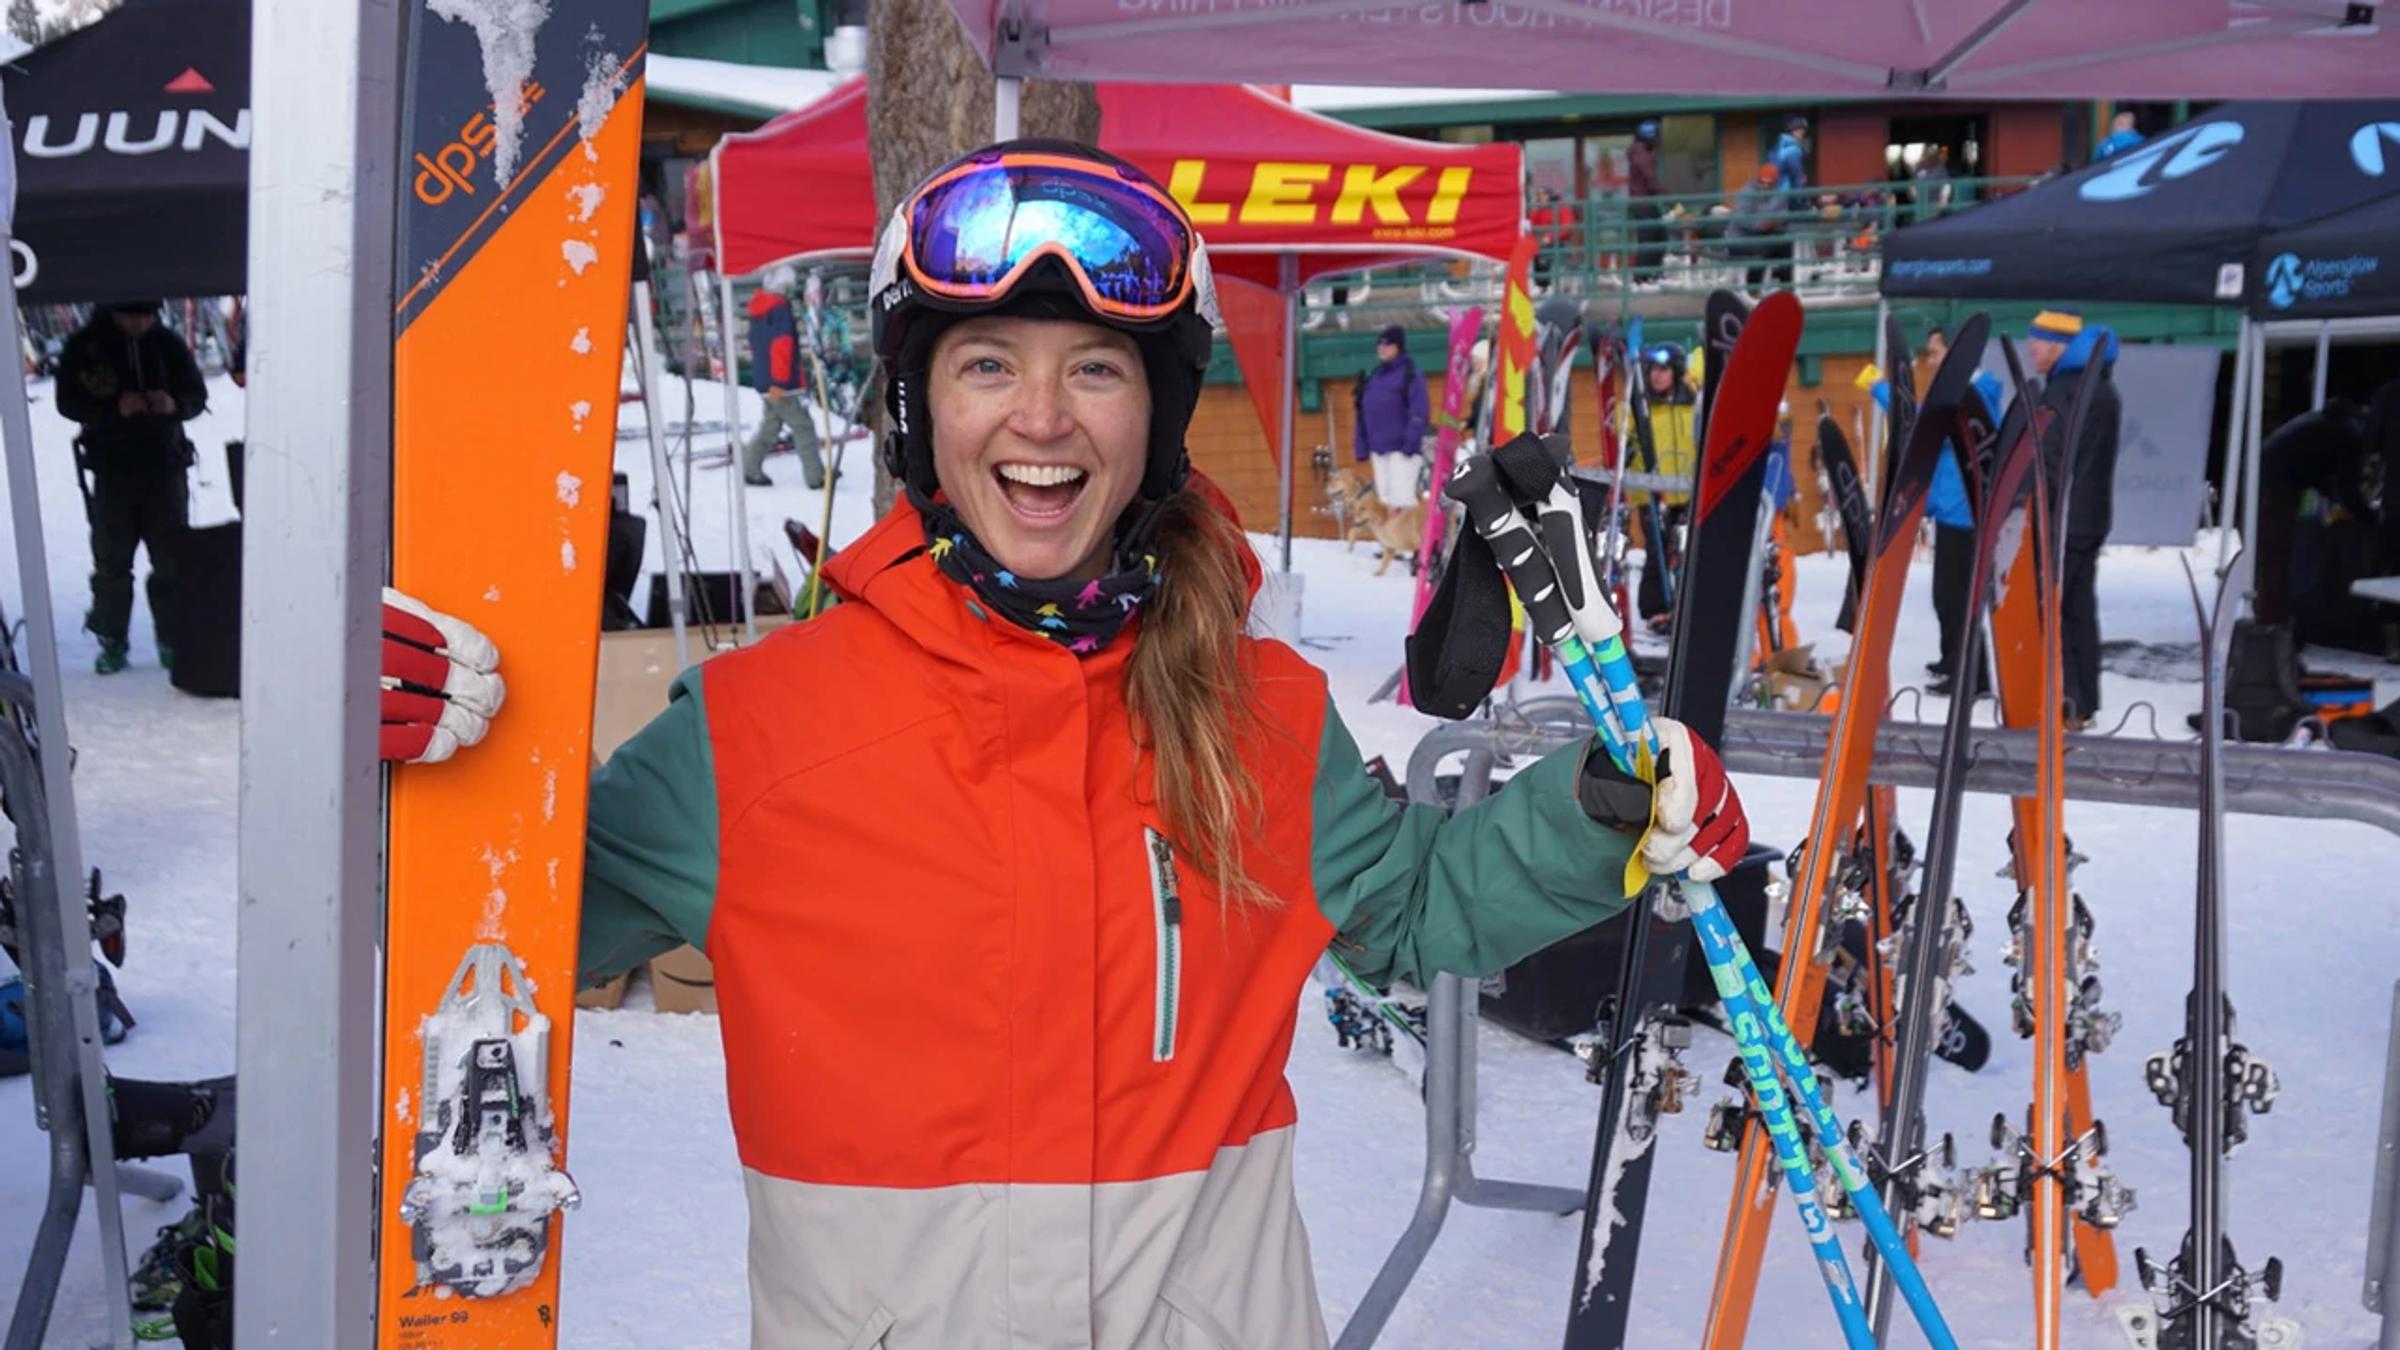 A woman picks skis at Alpenglow's annual Backcountry Demo Day event